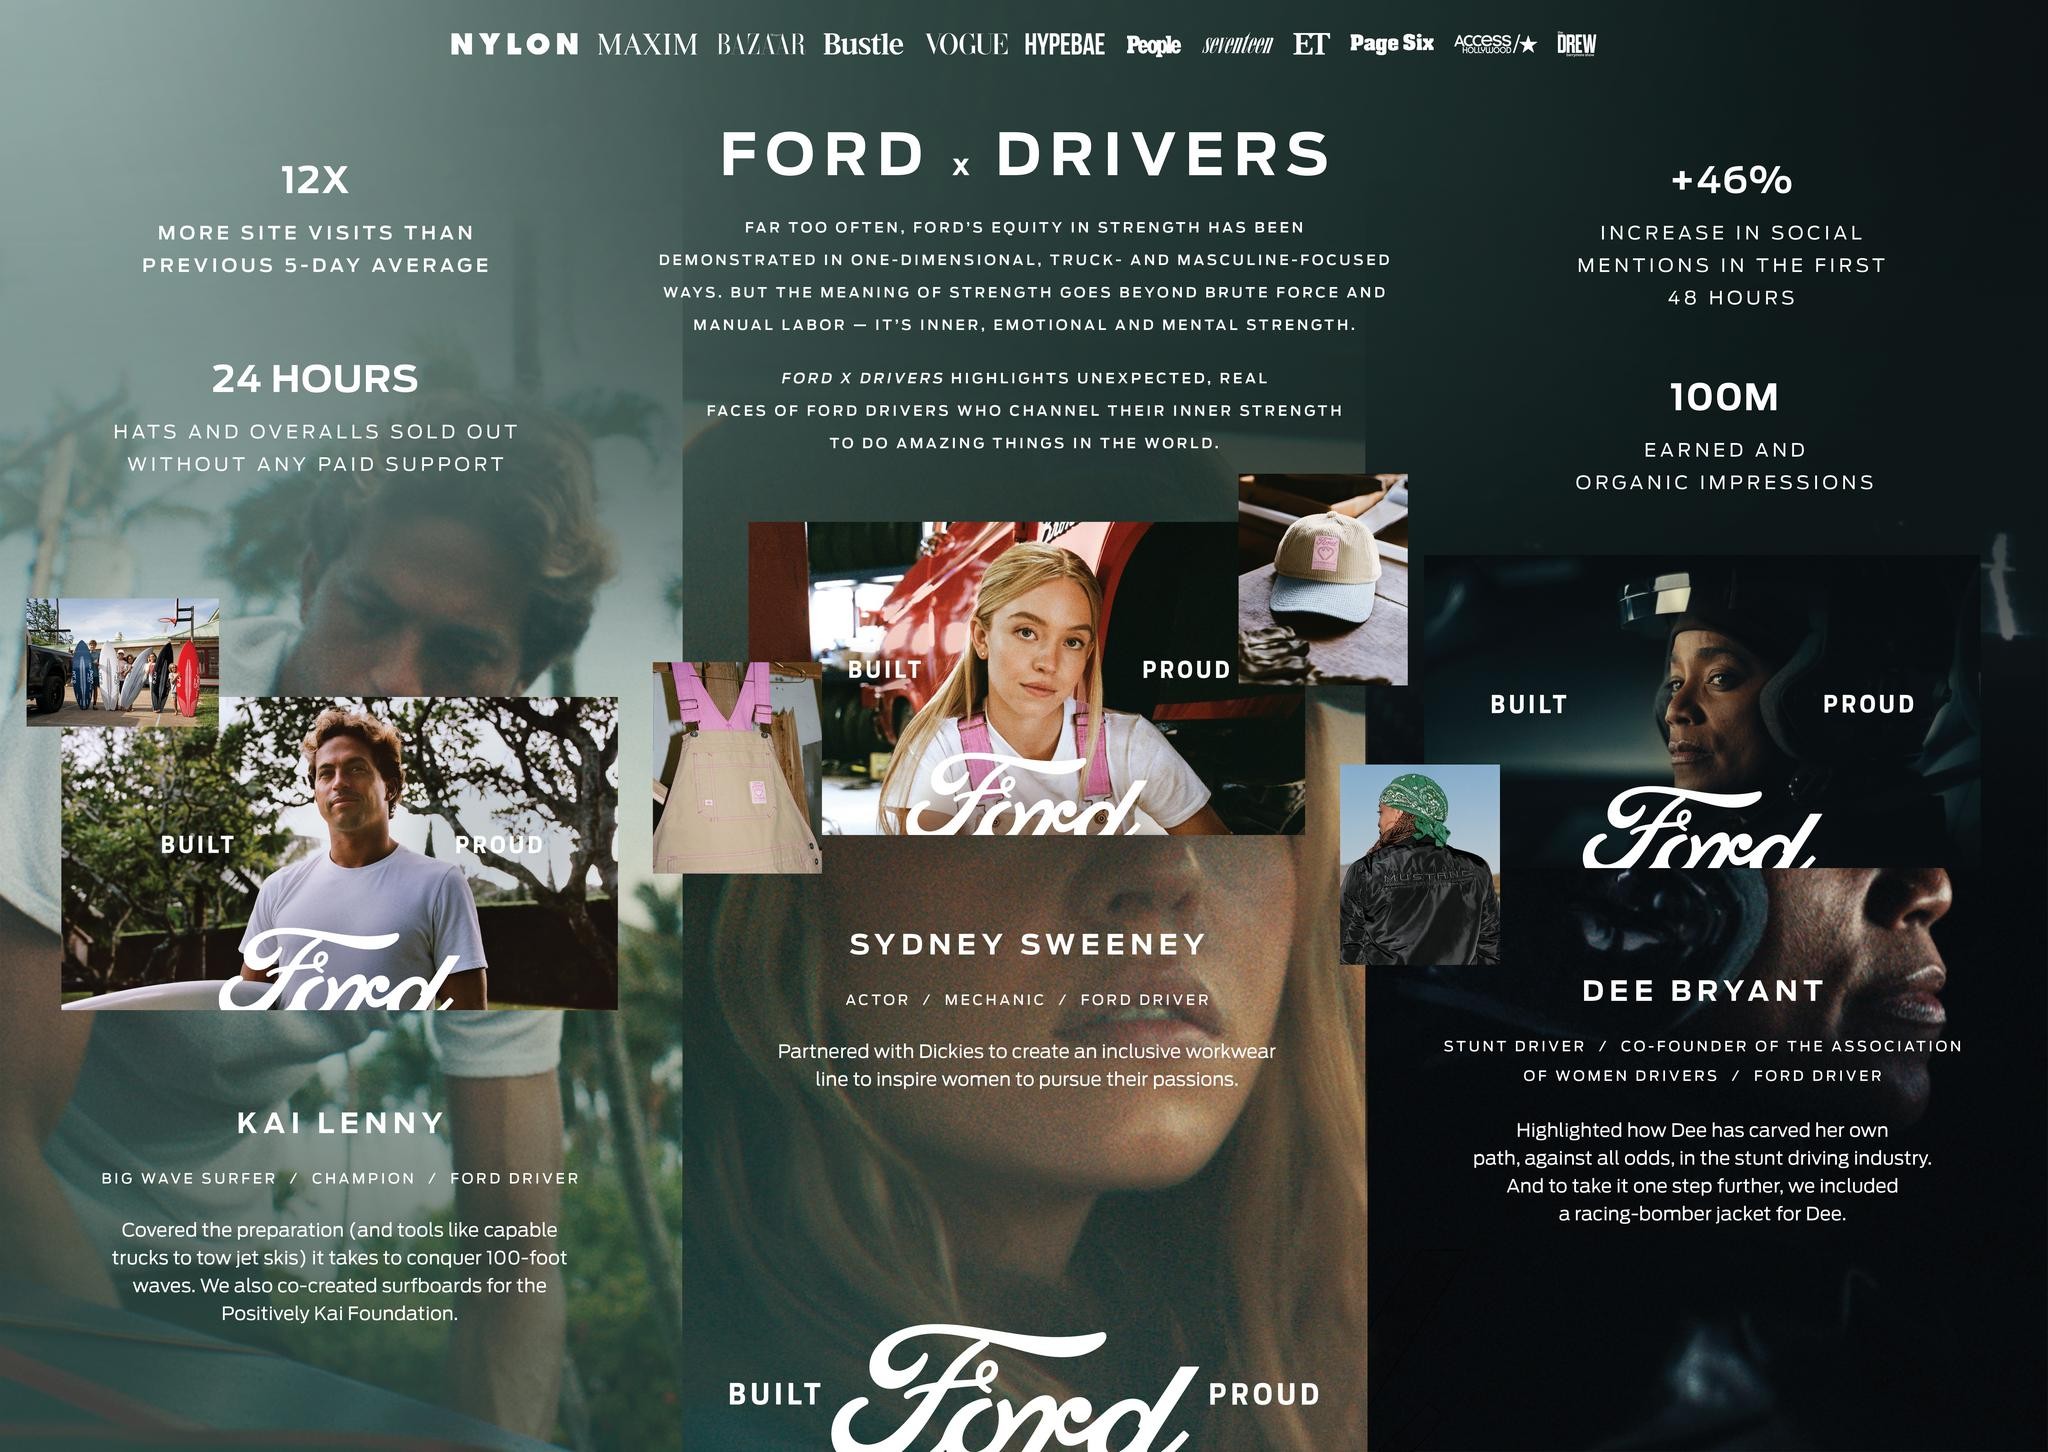 Ford: Built Ford Proud